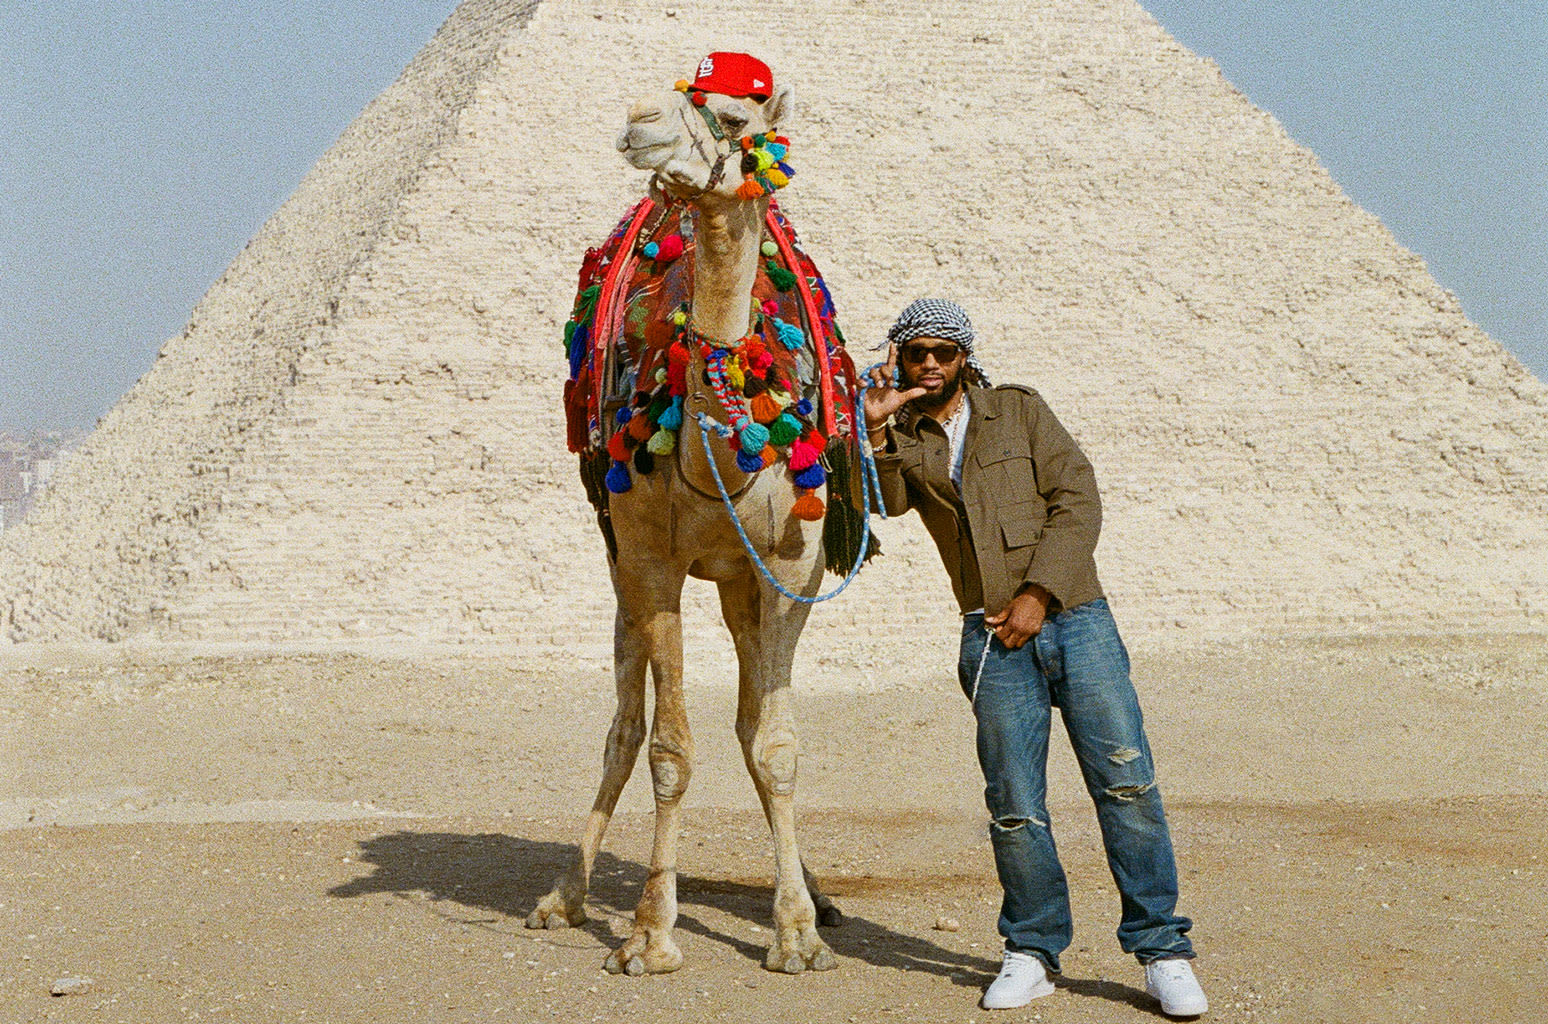 Metro Boomin at the Giza Pyramids: From Missouri to the Middle East, Redefining the Narrative of Rap